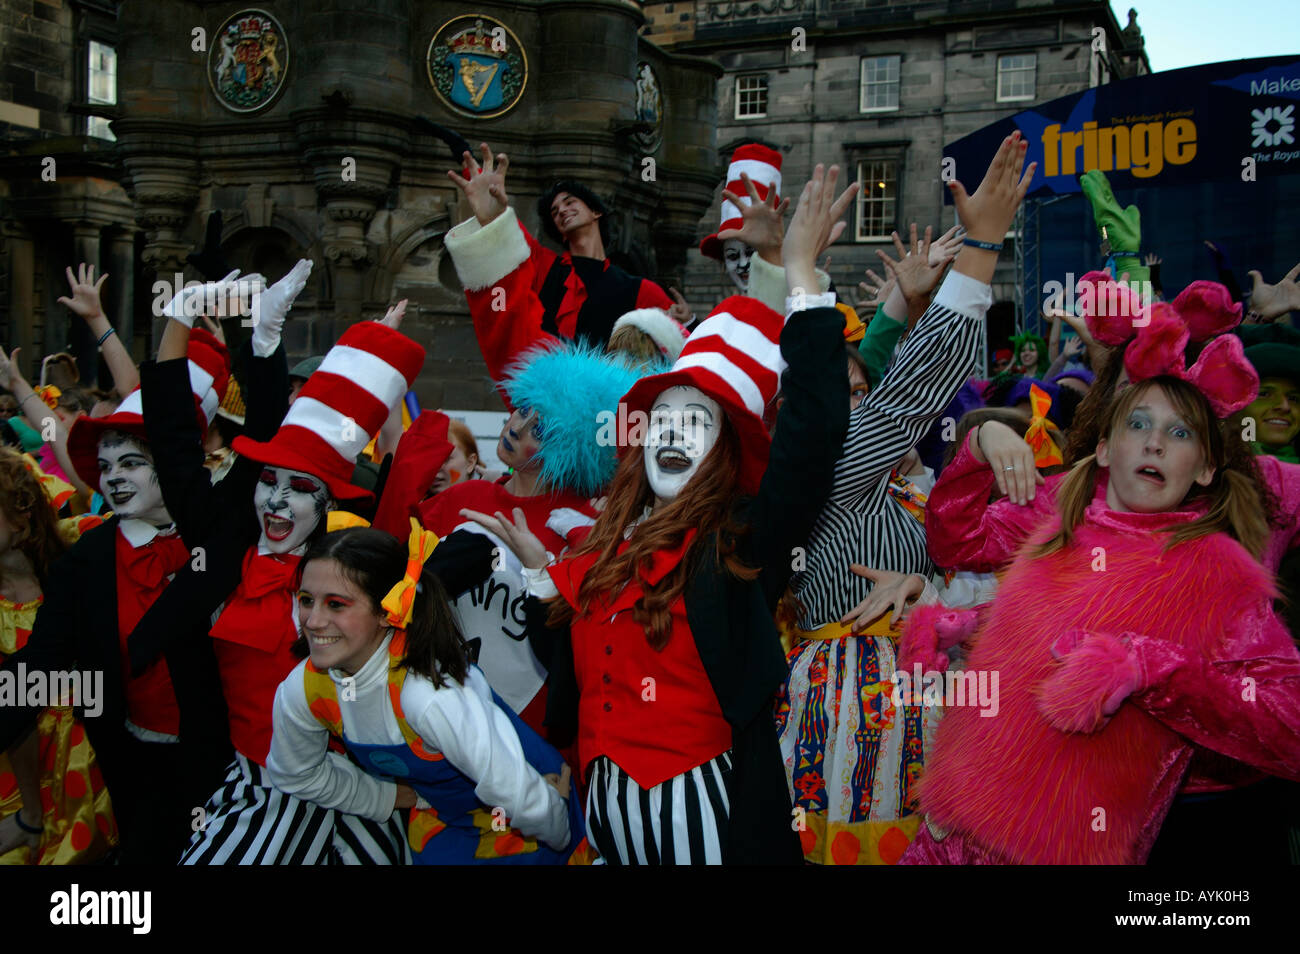 Entertainers performing to promote their show during the Edinburgh Fringe Festival, Scotland, UK, Europe Stock Photo